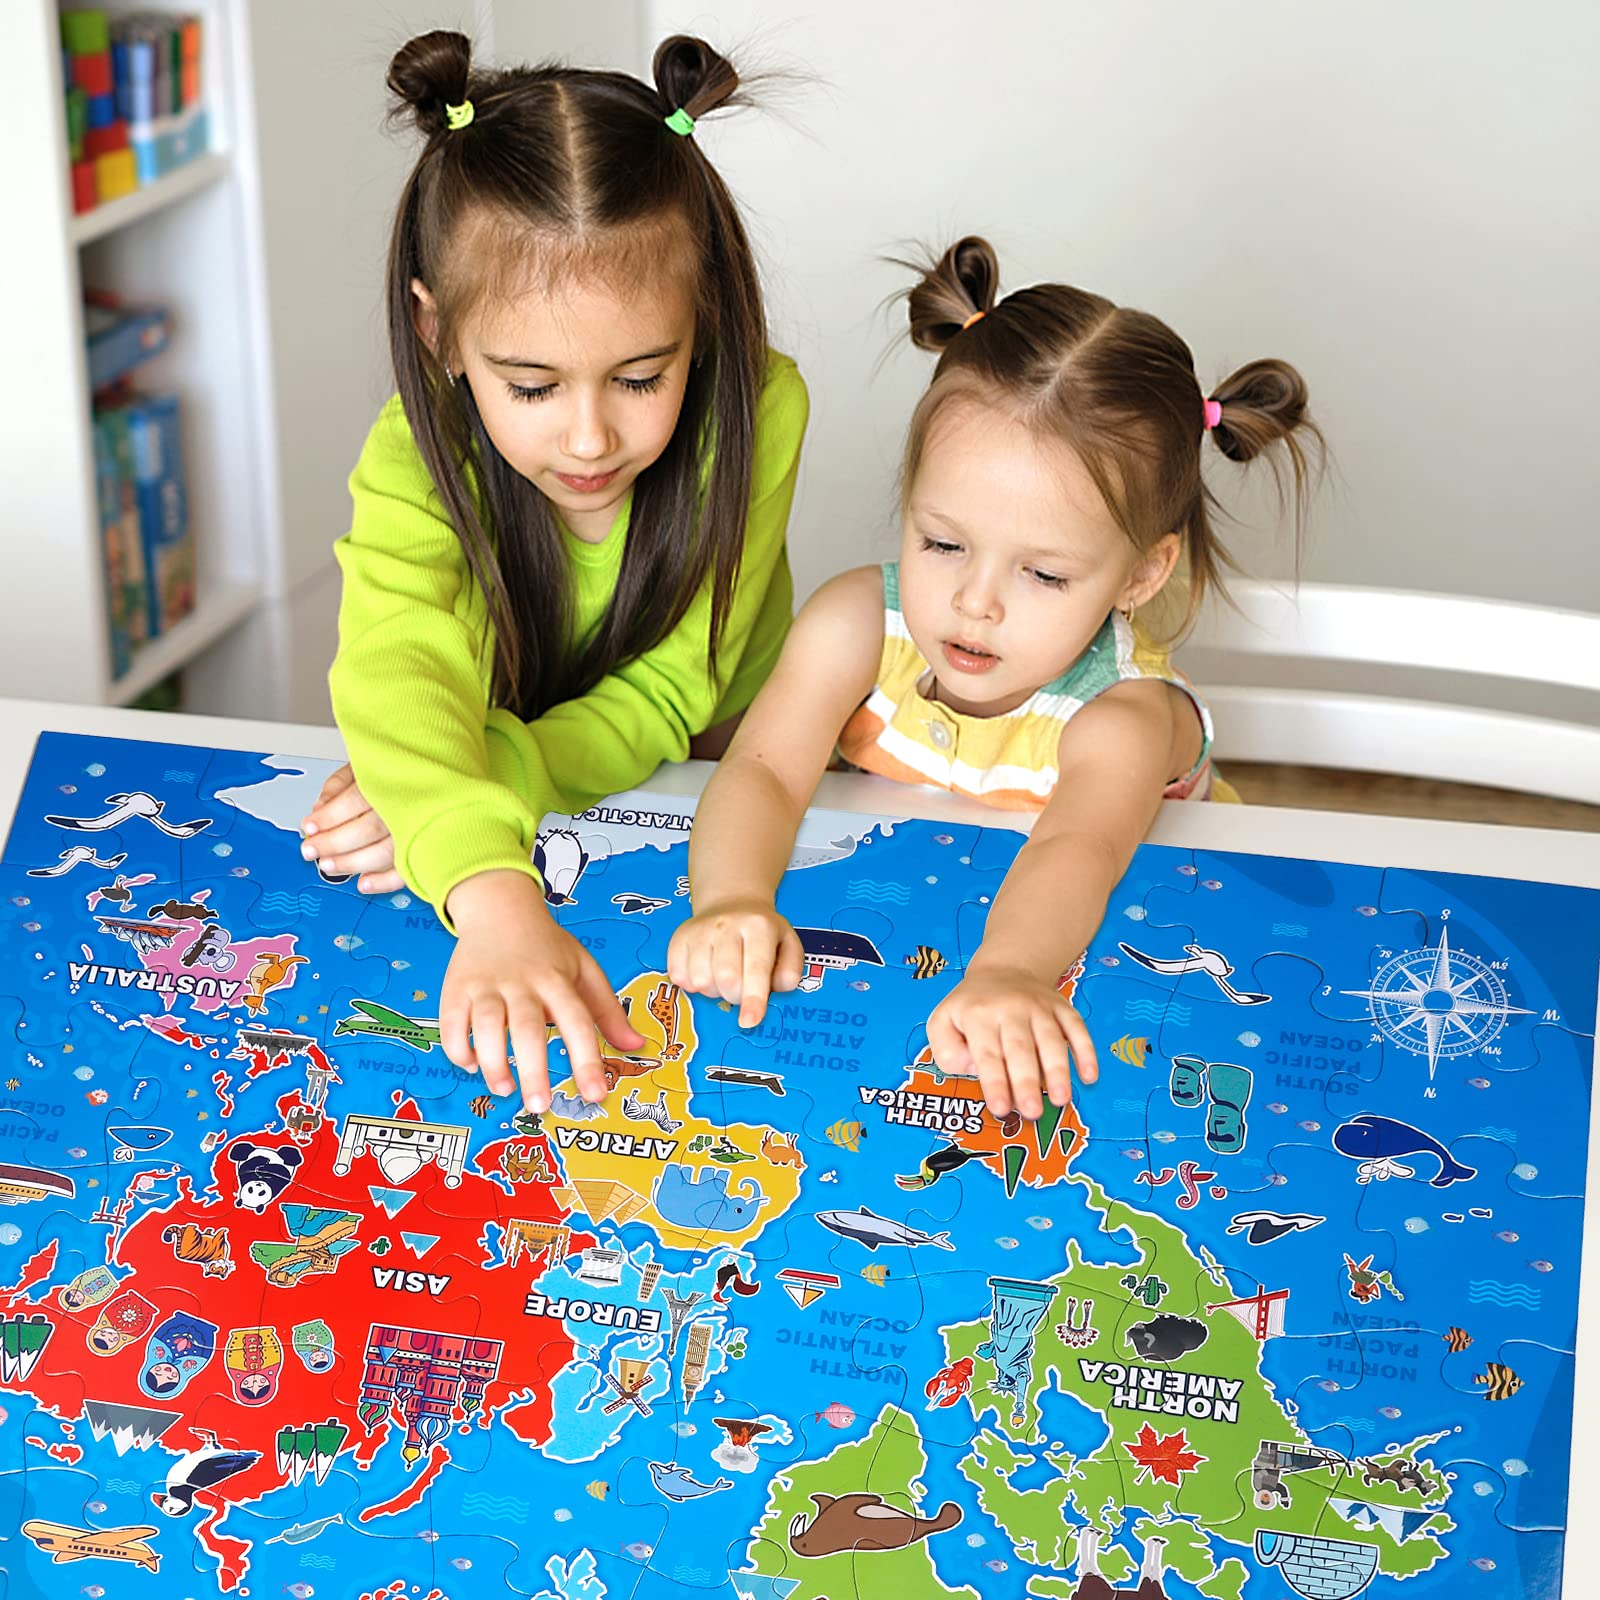 Jumbo Floor Puzzle for Kids,World Map Puzzle Jigsaw Geography Puzzles,48 Piece Globe Atlas Puzzle with Continents,Puzzle for Toddler Ages 3-5,Preschool Learning Toys Gift for 4-8 Years Old